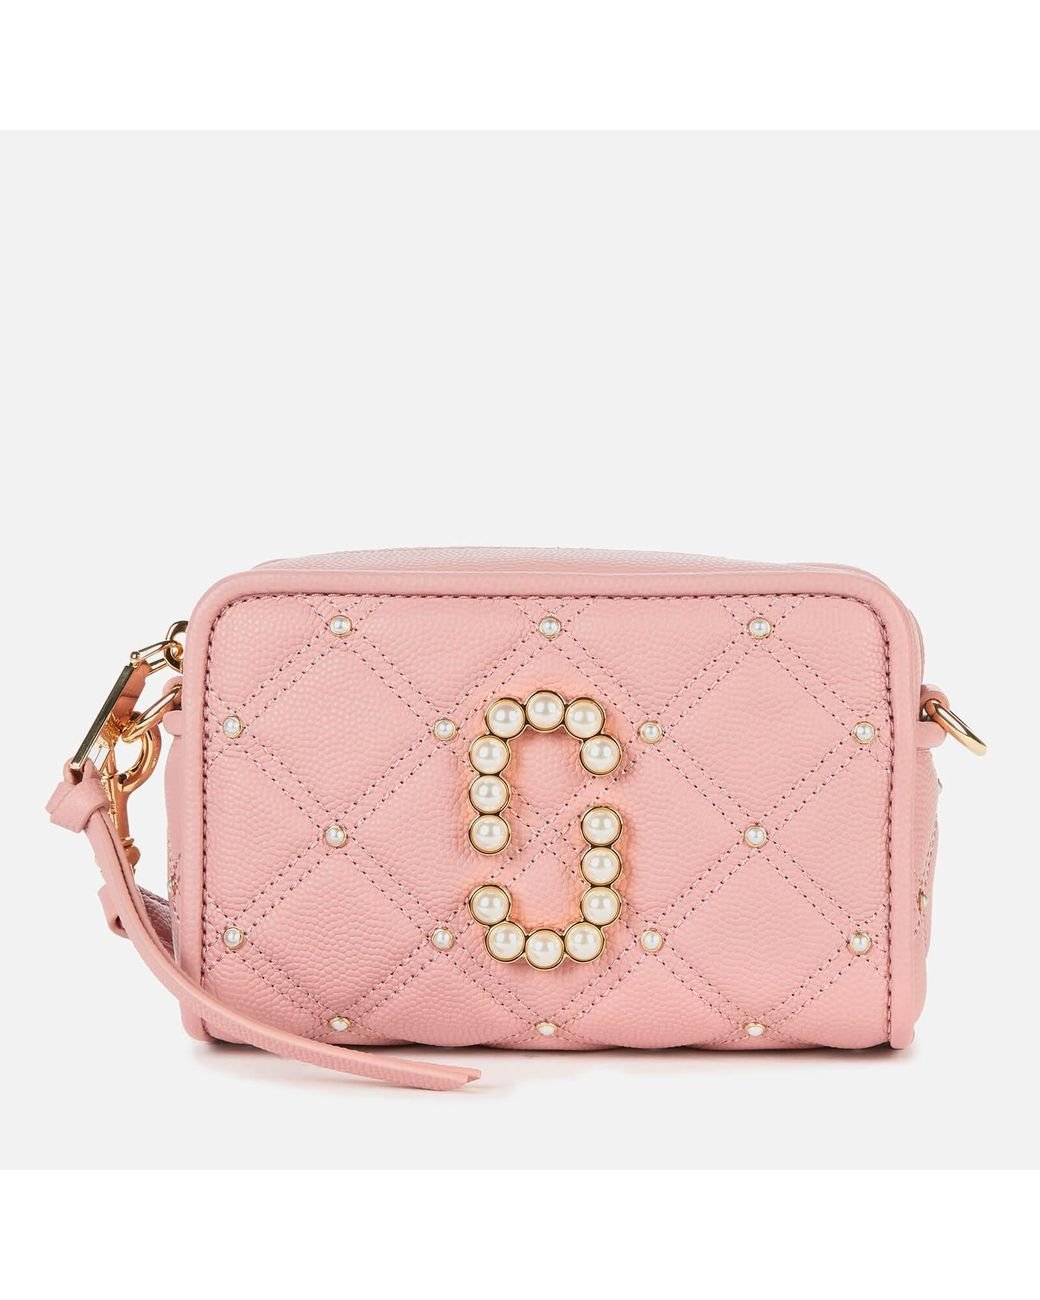 Marc Jacobs Bag Pink Shell Large